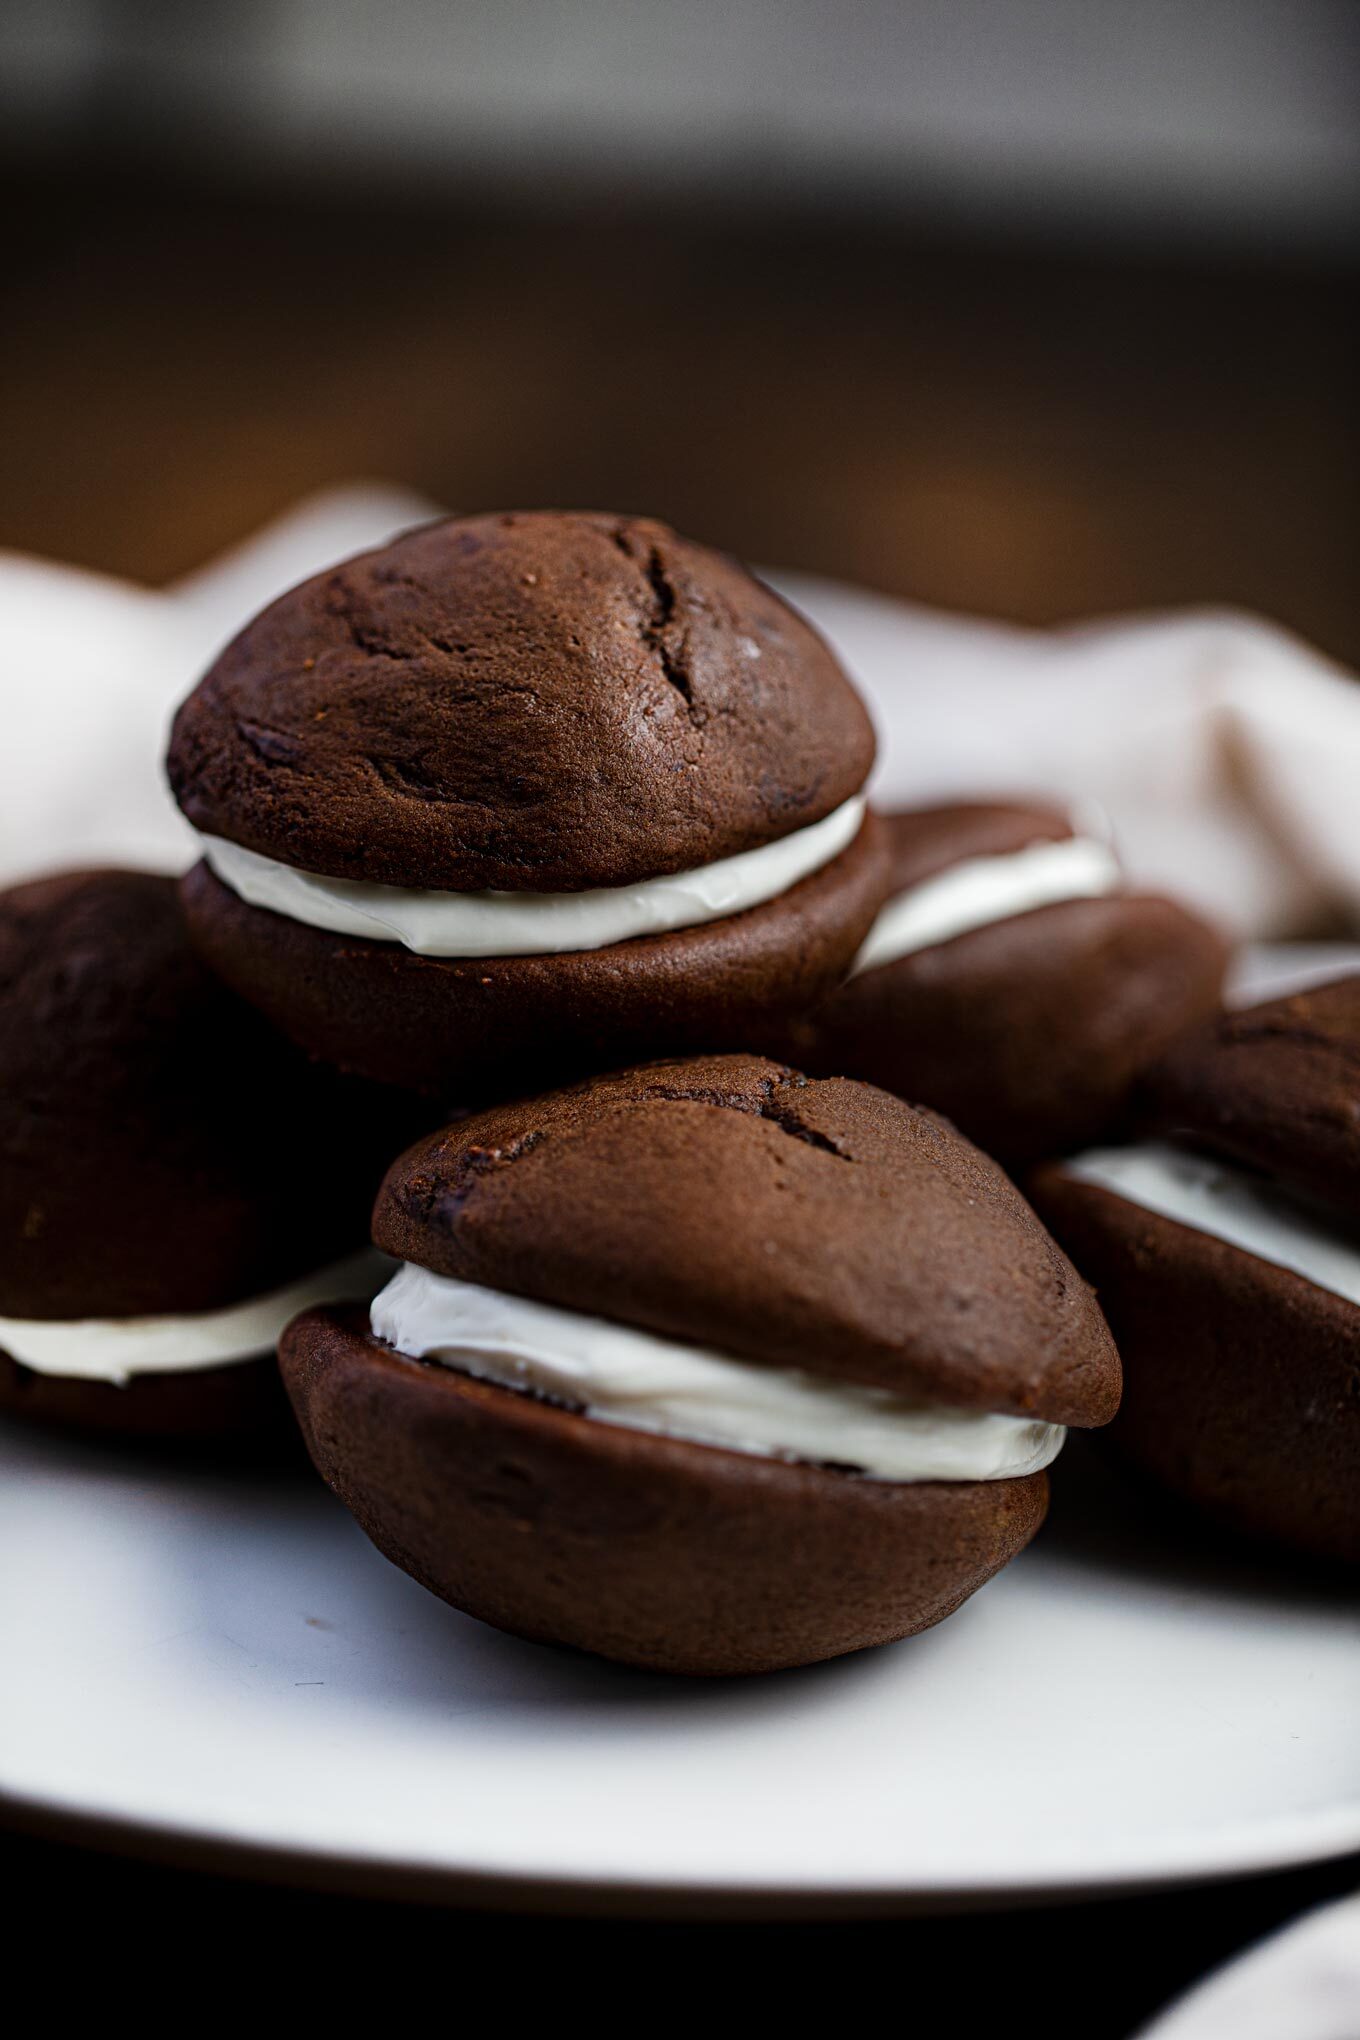 Plate full of chocolate whoopie pies with marshmallow fluff filling